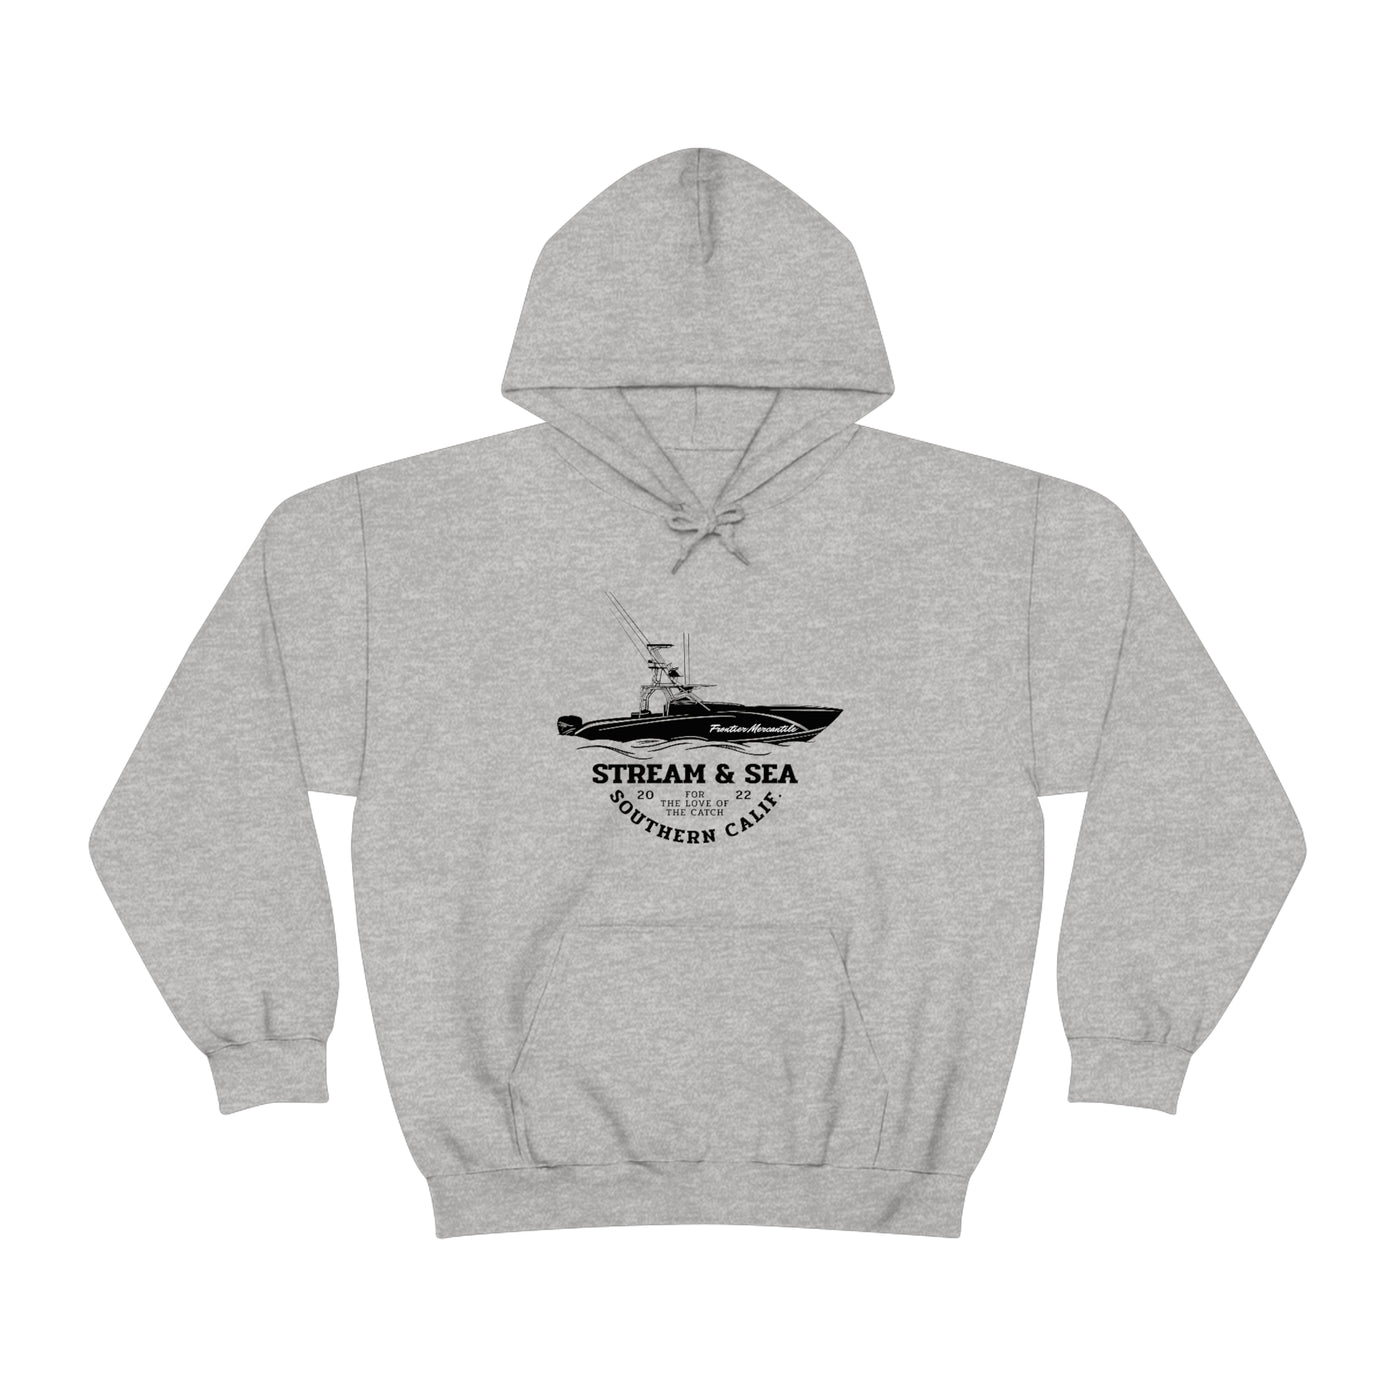 For the Love of the Catch - Stream & Sea Hooded Sweatshirt